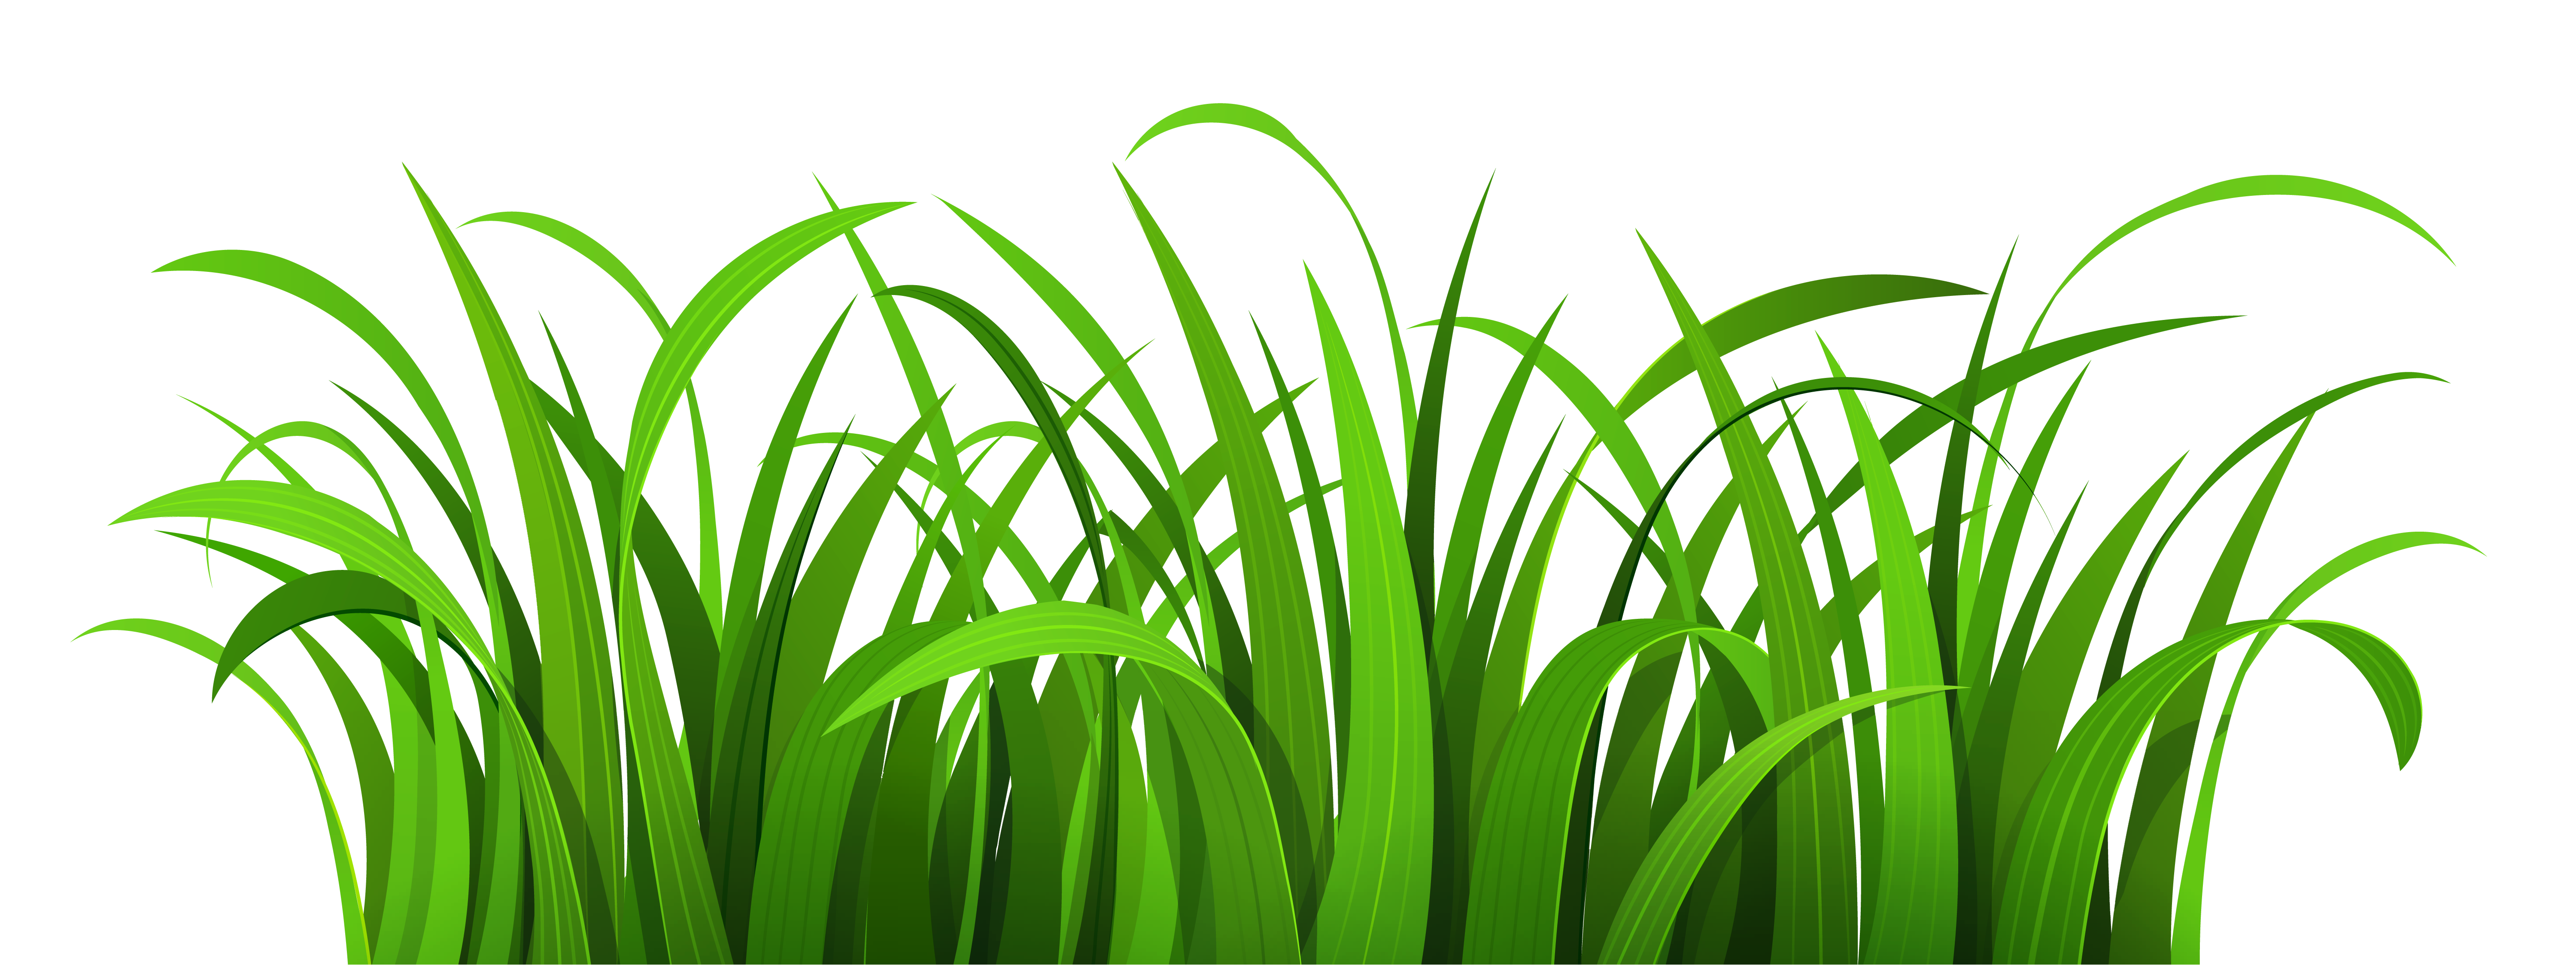 free clipart grass and flowers - photo #35